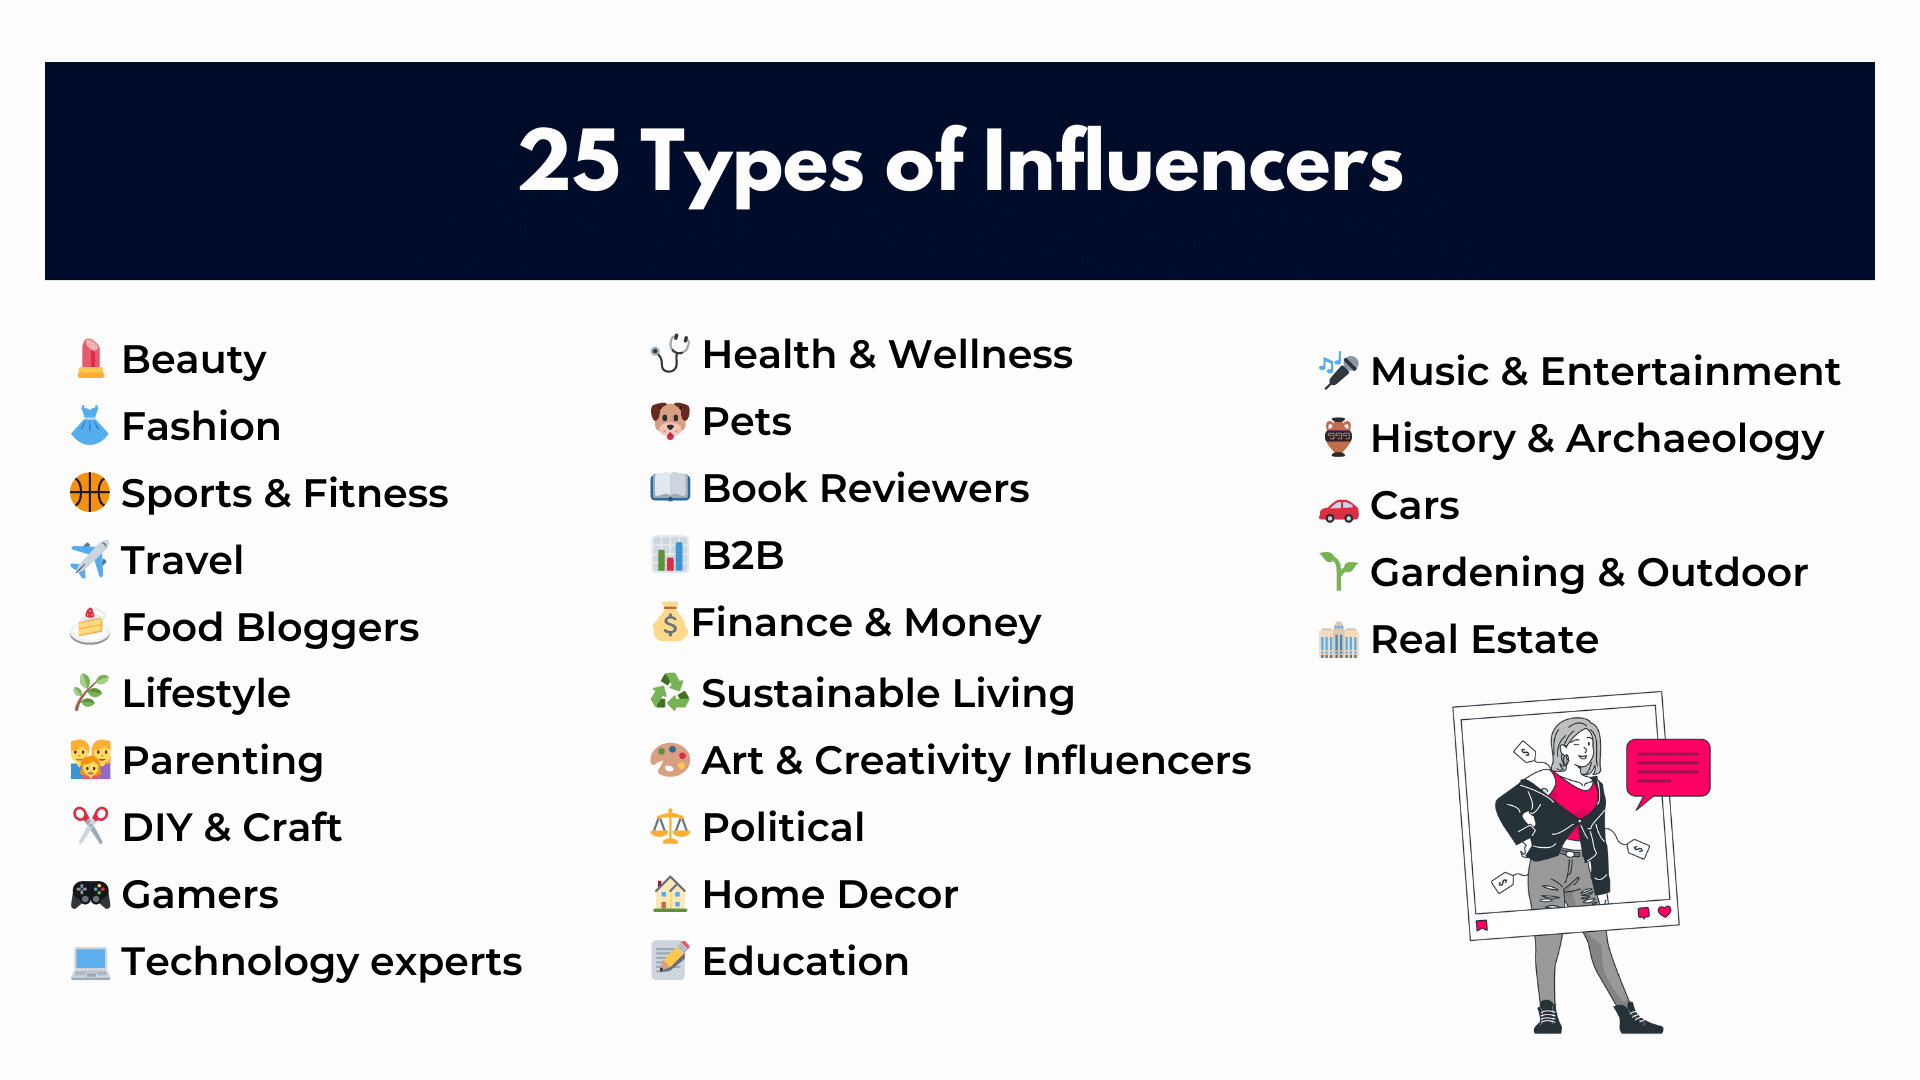 List of the 25 types of influencers, including beauty, food bloggers, pets, gamers, athletes and more!